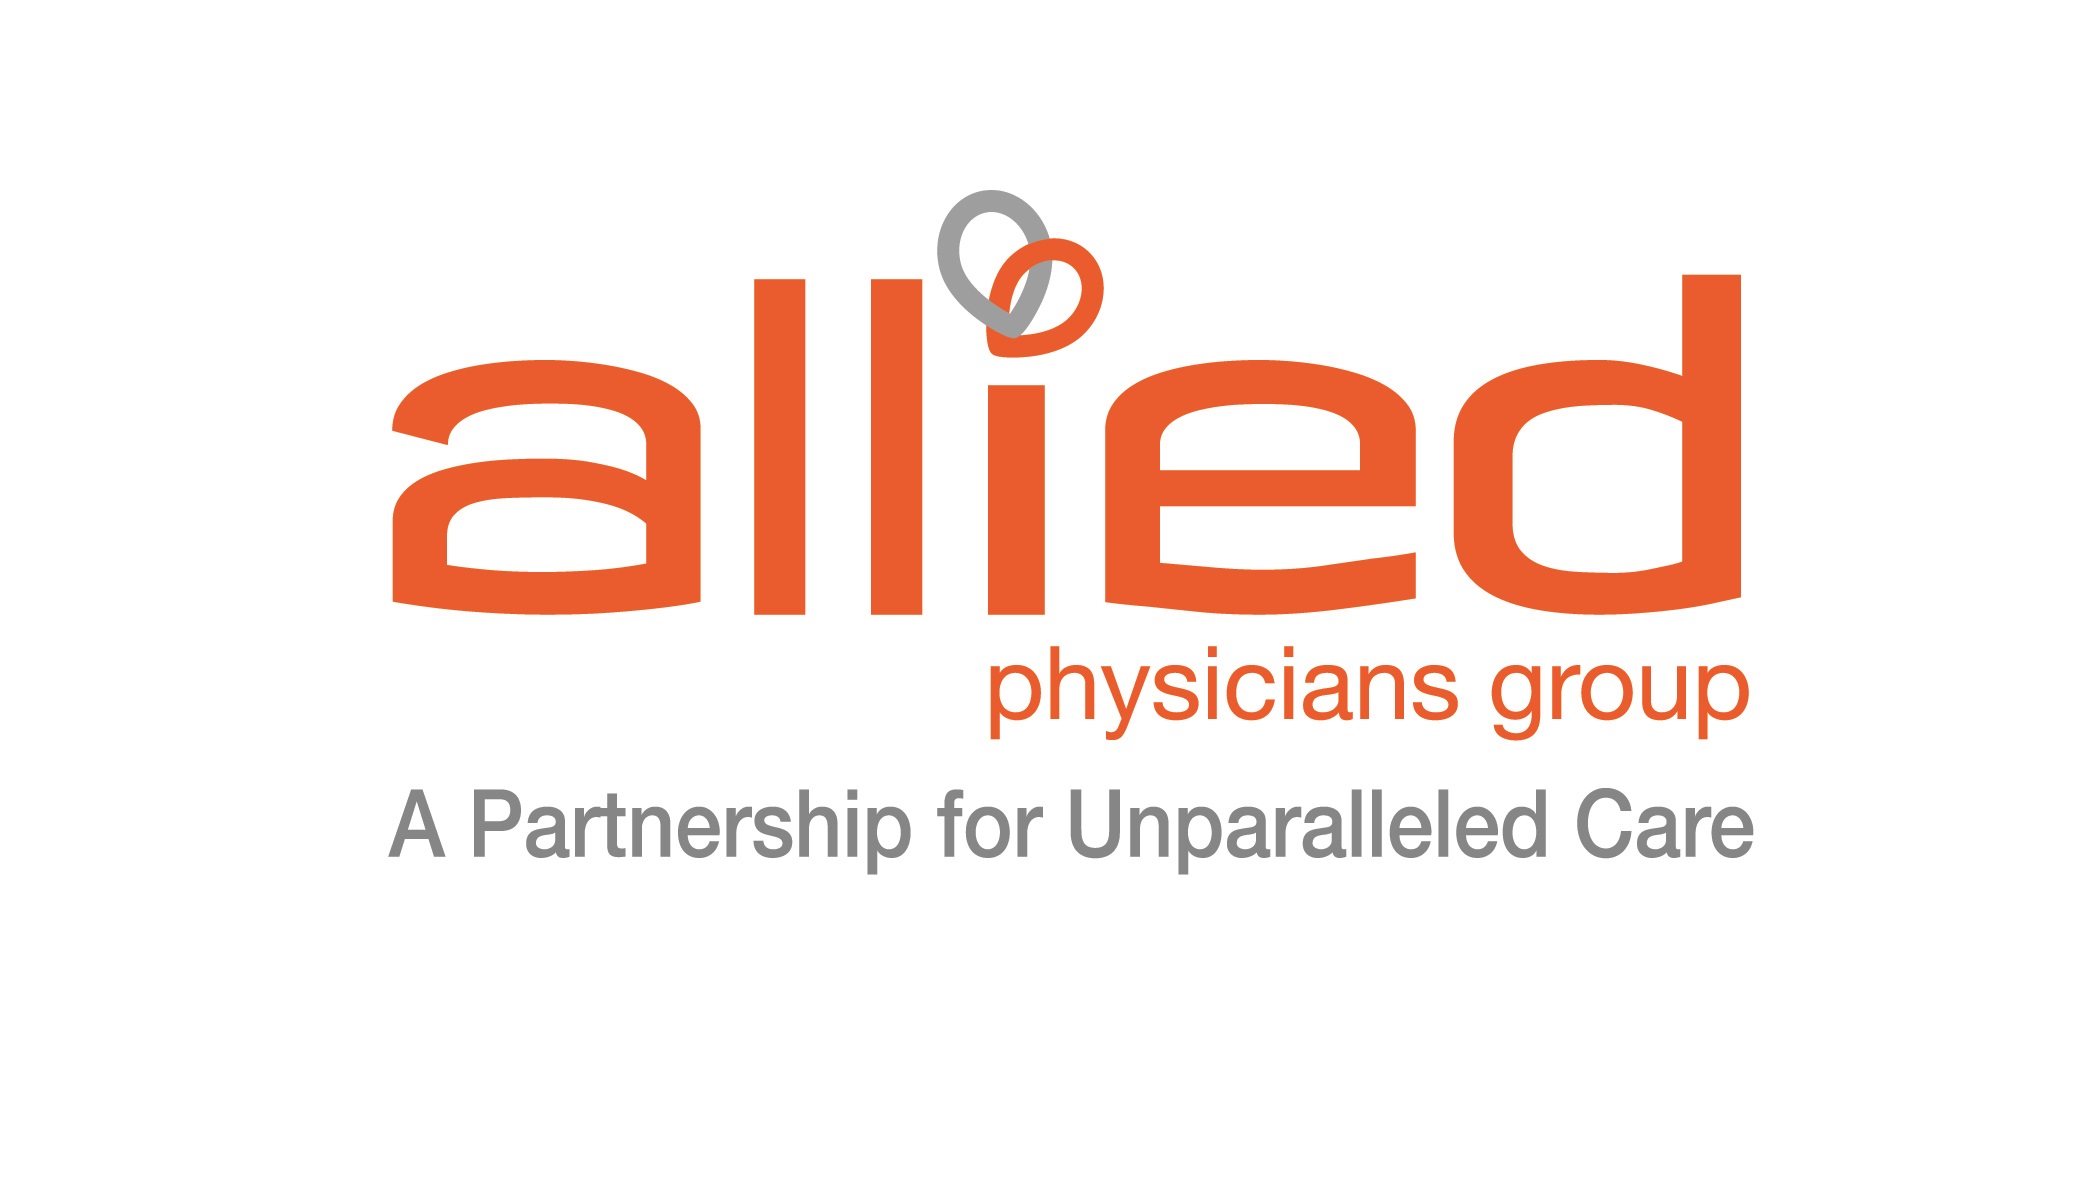 Allied Physicians Group logo